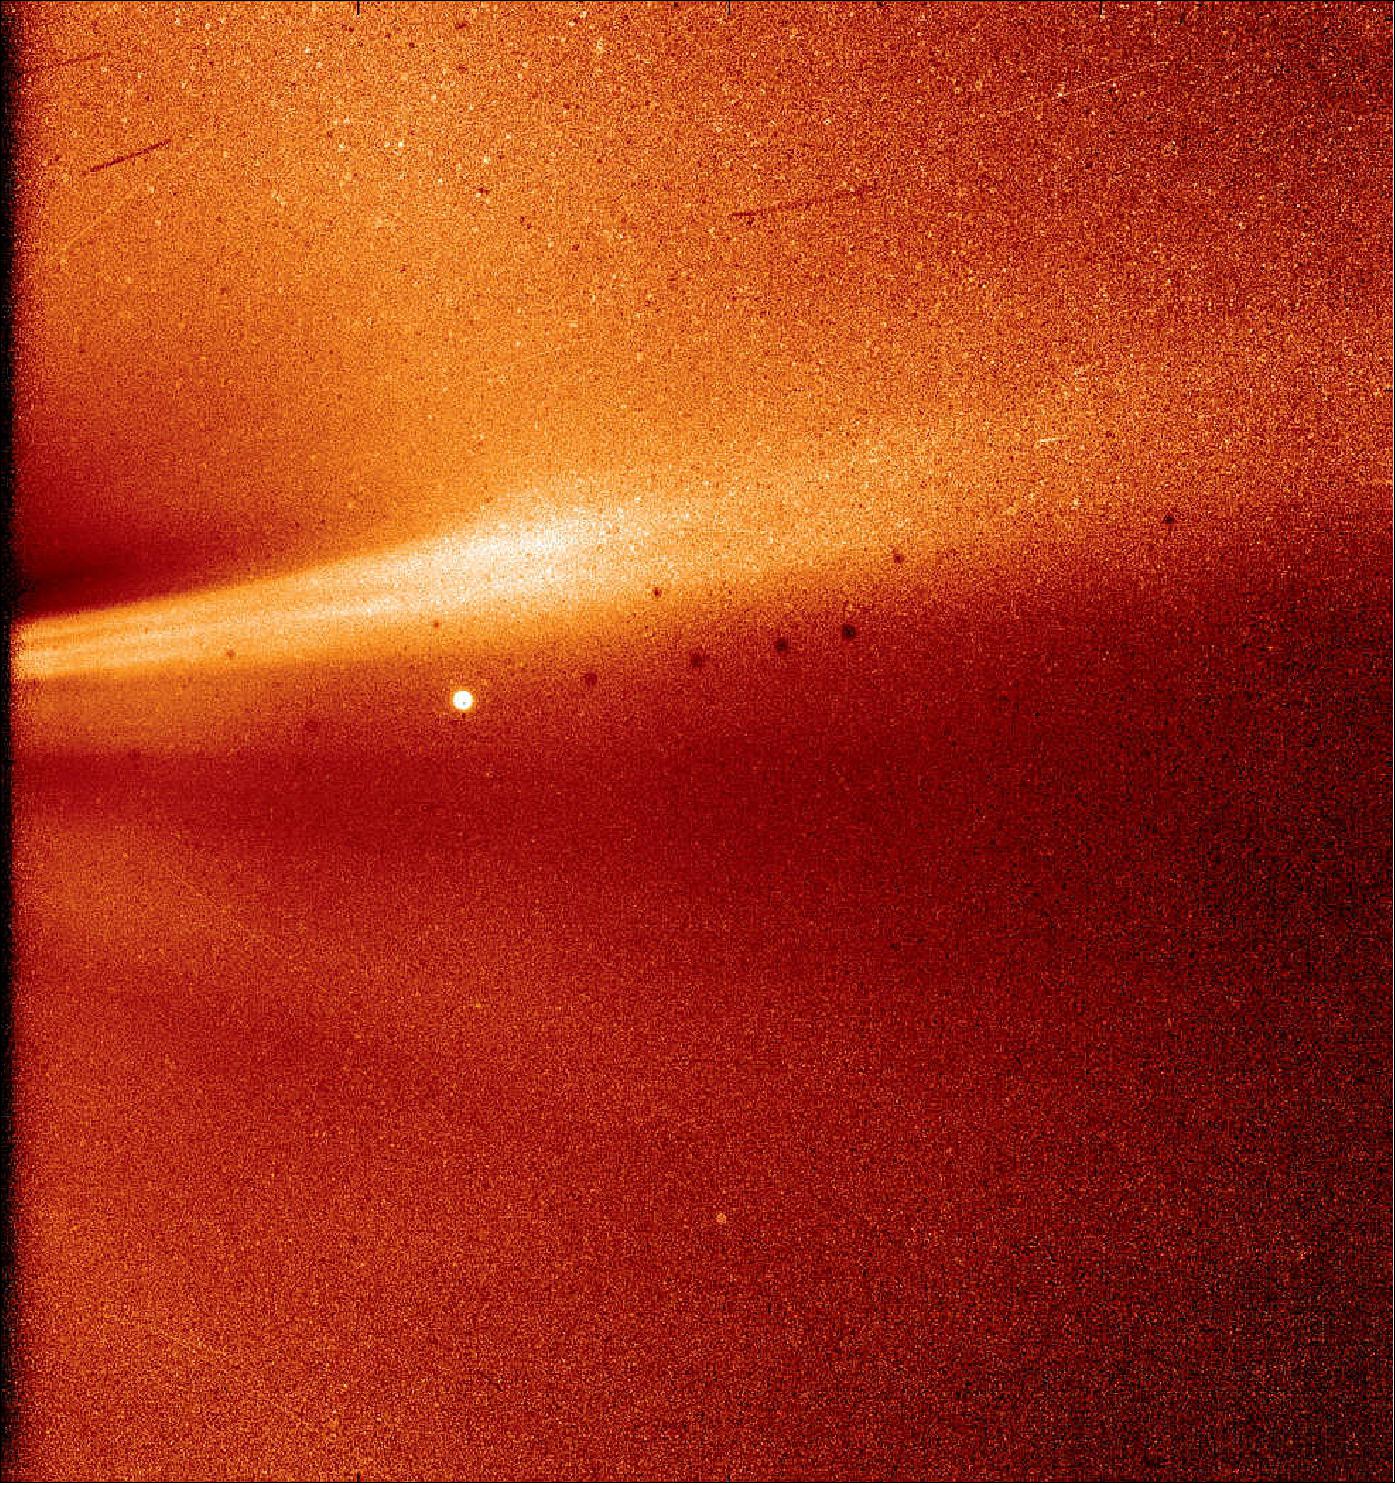 Figure 10: This image from Parker Solar Probe's WISPR (Wide-field Imager for Solar Probe) instrument shows a coronal streamer, seen over the east limb of the Sun on 8 November 2018, at 1:12 a.m. EST. Coronal streamers are structures of solar material within the Sun's atmosphere, the corona, that usually overlie regions of increased solar activity. The fine structure of the streamer is very clear, with at least two rays visible. Parker Solar Probe was about 16.9 million miles from the Sun's surface when this image was taken. The bright object near the center of the image is Mercury, and the dark spots are a result of background correction (image credit: NASA/Naval Research Laboratory/Parker Solar Probe)